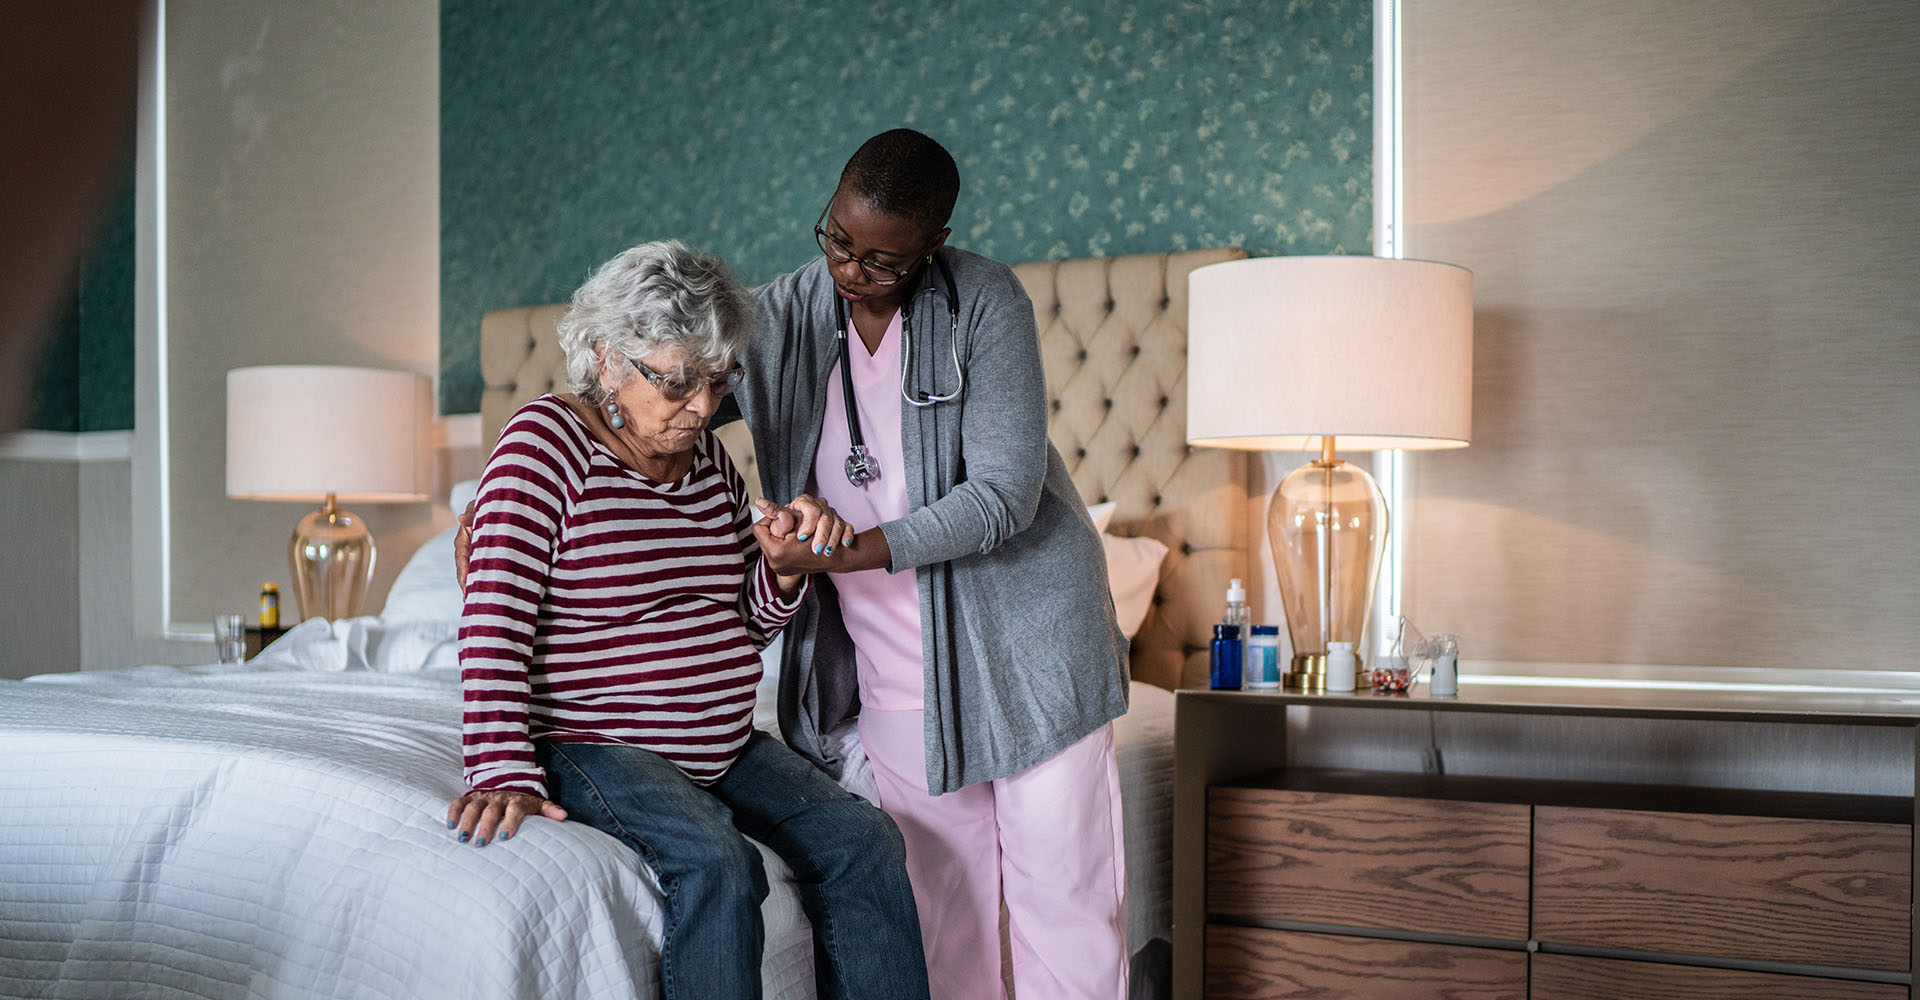 Nurse helping senior lady out of bed